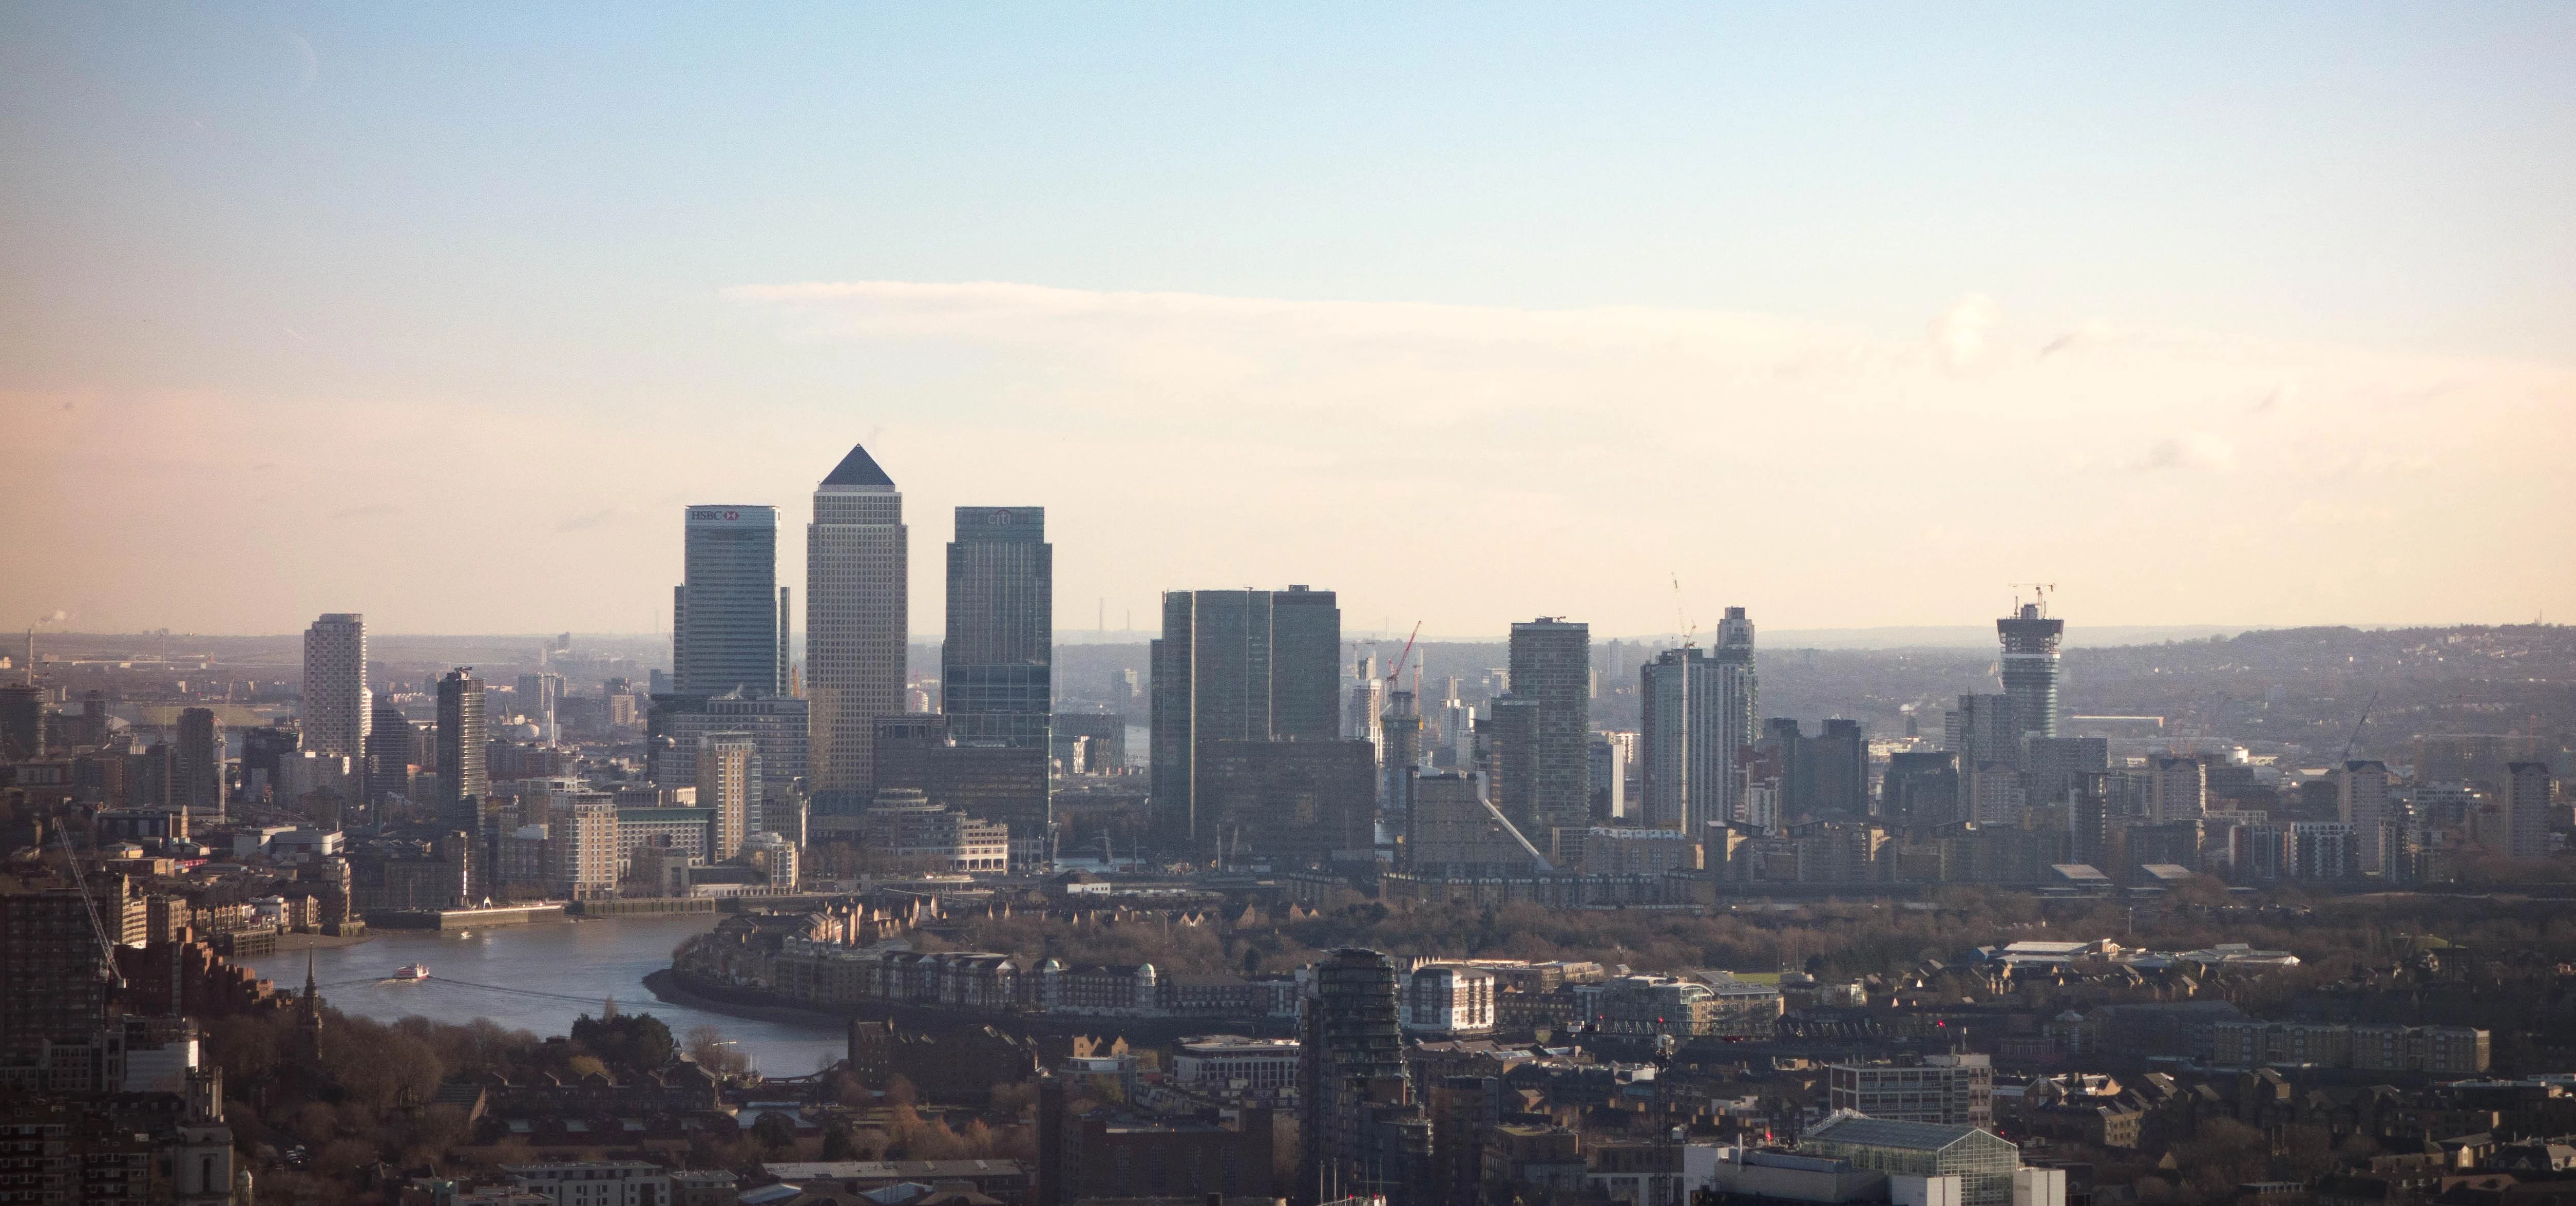 Canary Wharf from the Walkie Talkie